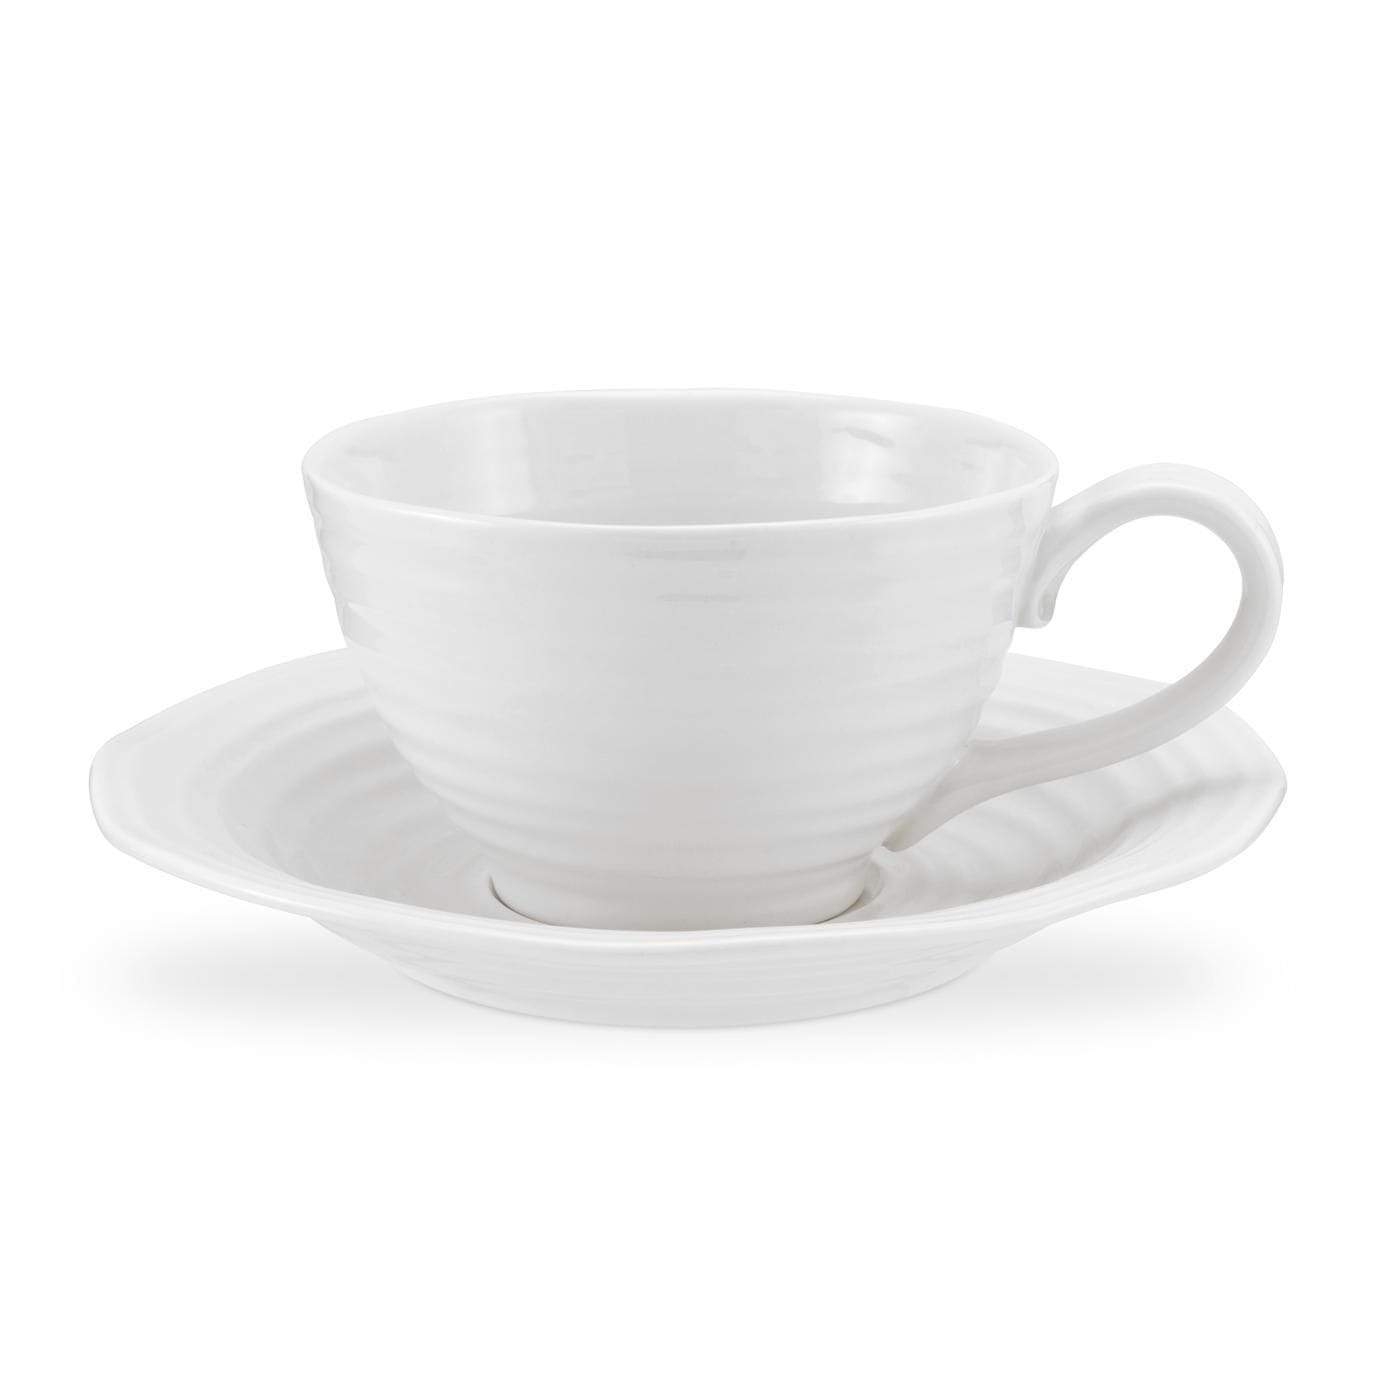 Sophie Conran for Portmeirion White Jumbo Cup and Saucer